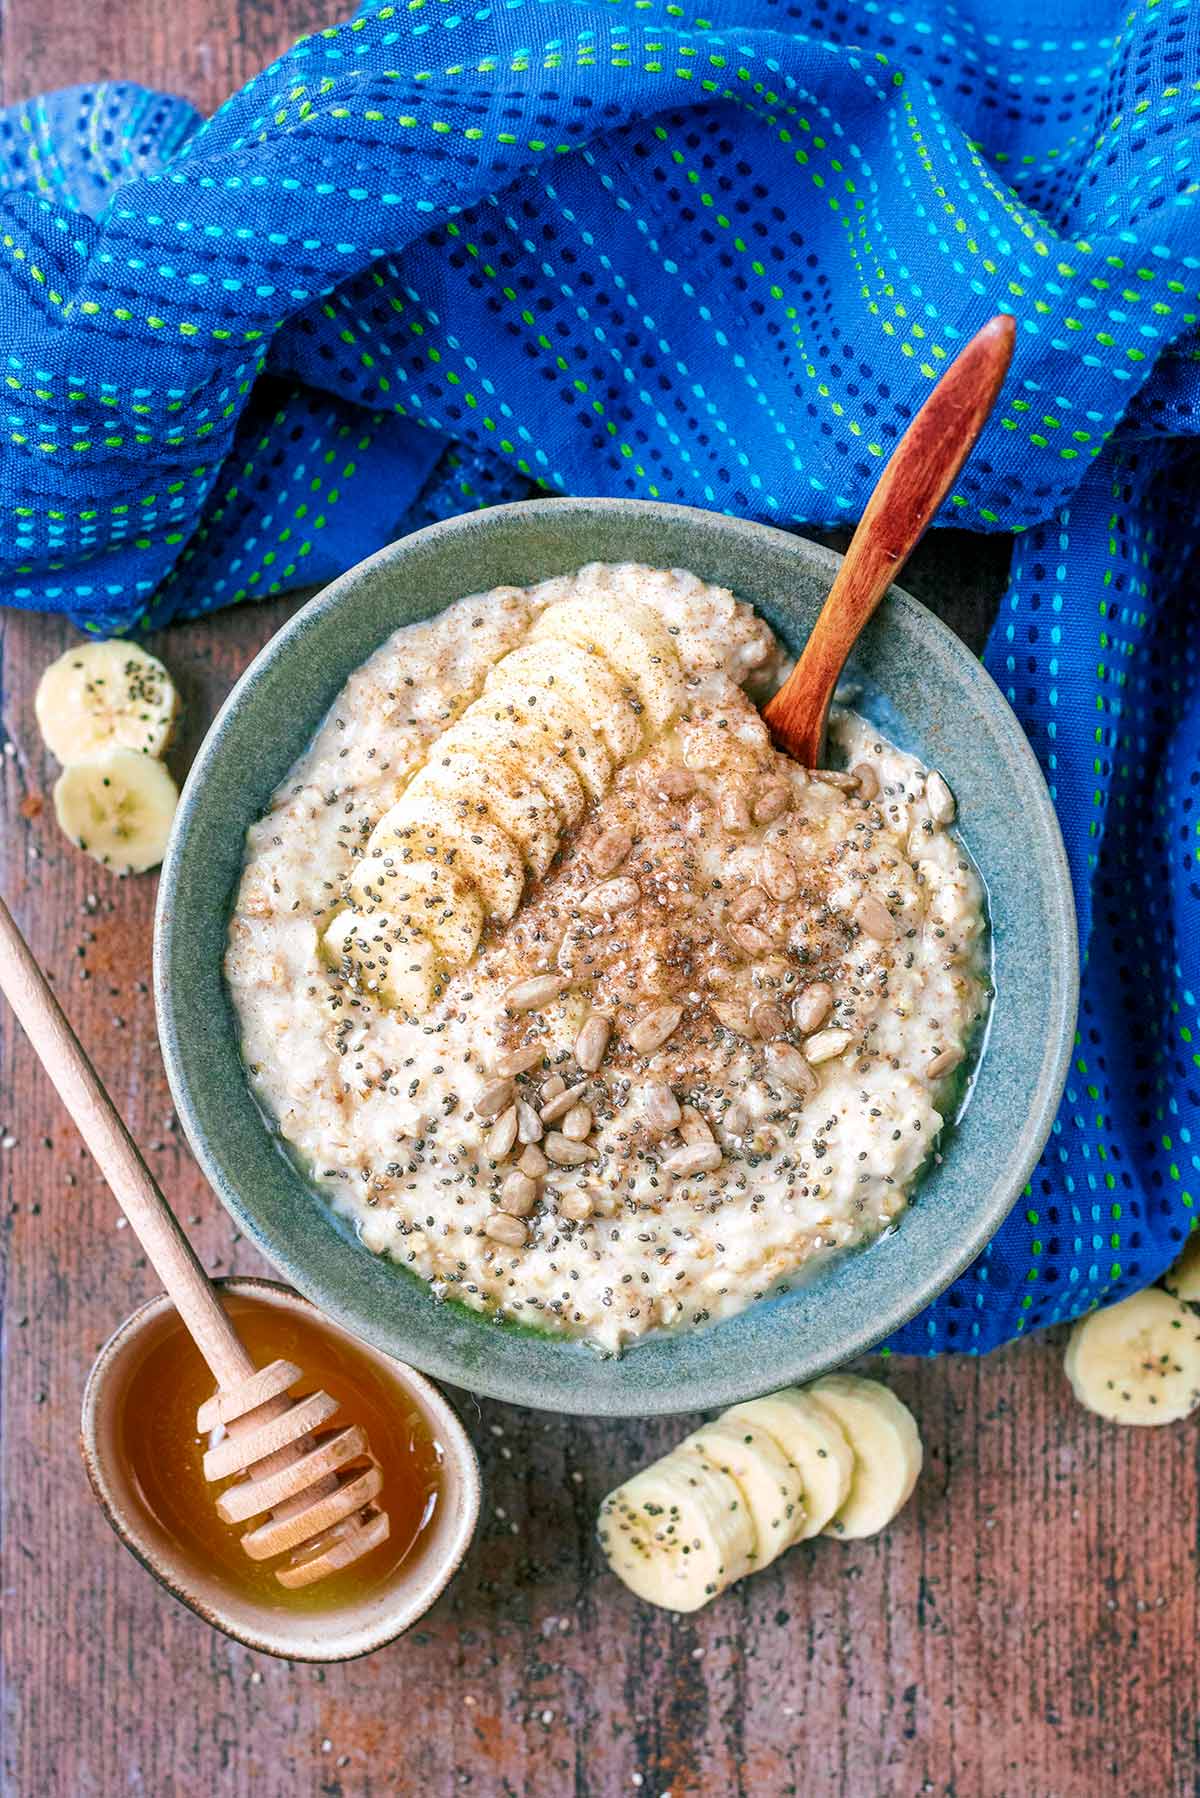 A bowl of porridge topped with banana slices, honey and seeds.